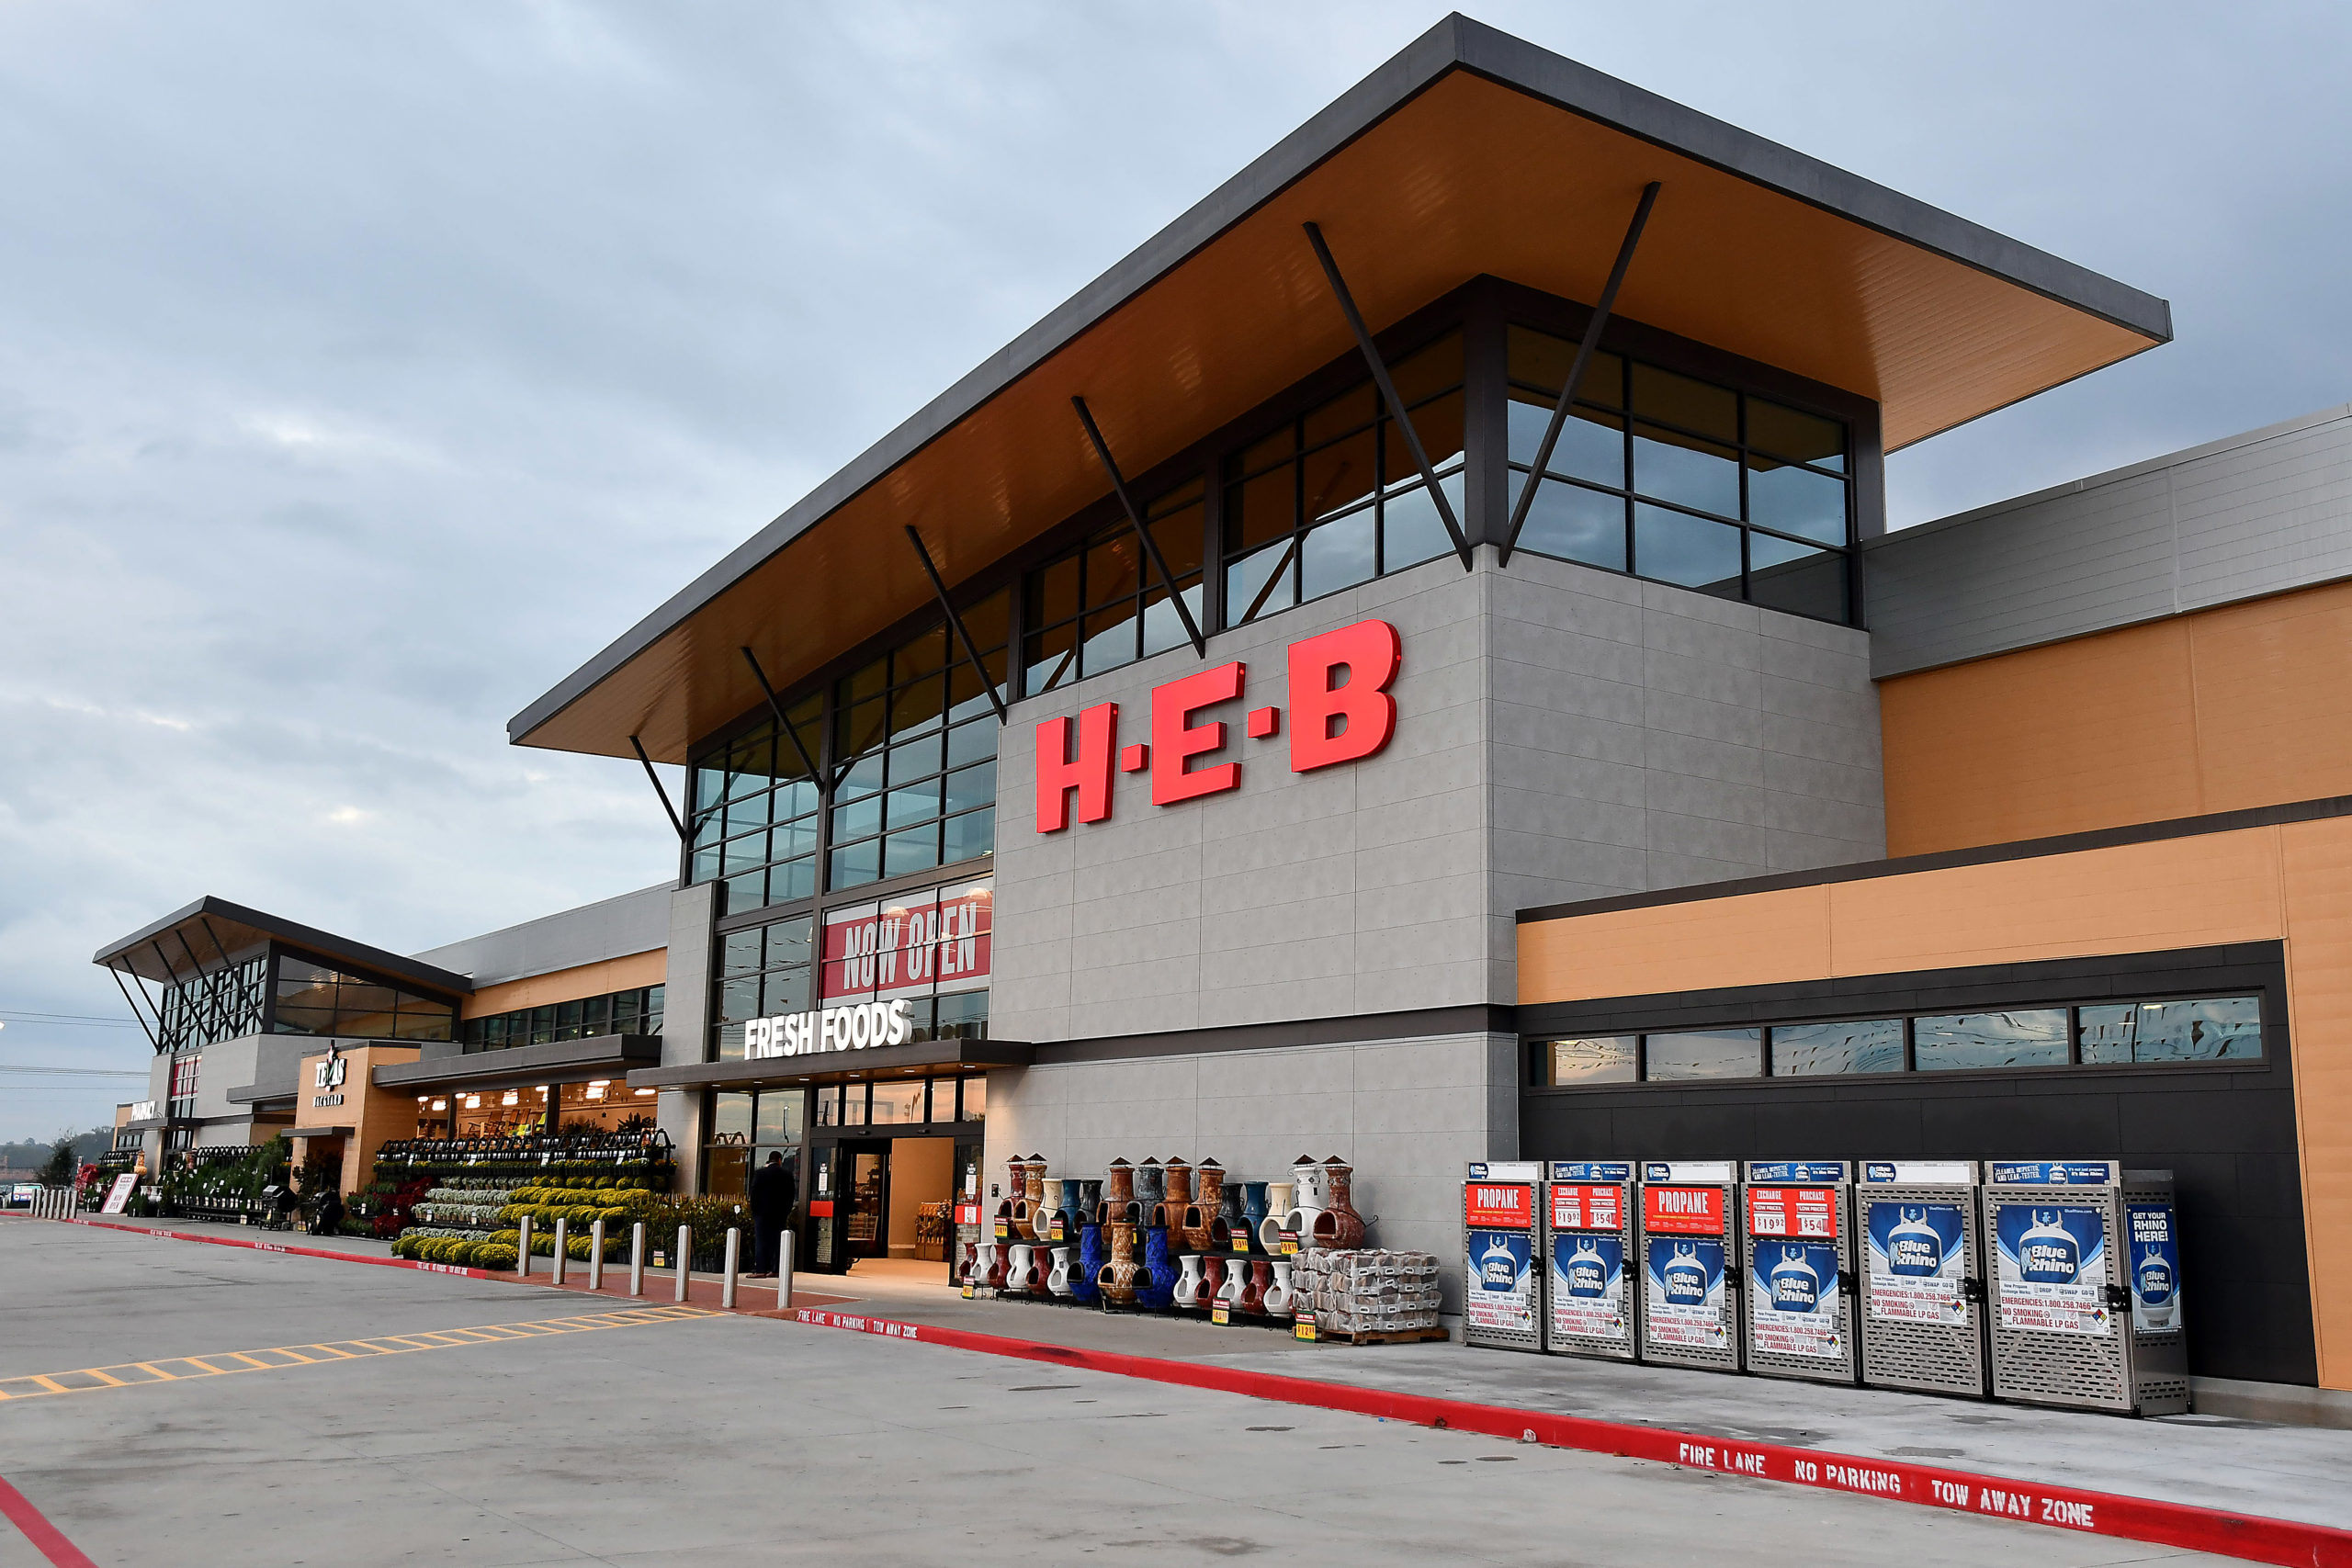 HOLIDAY HOURS AT HEB HEB Newsroom